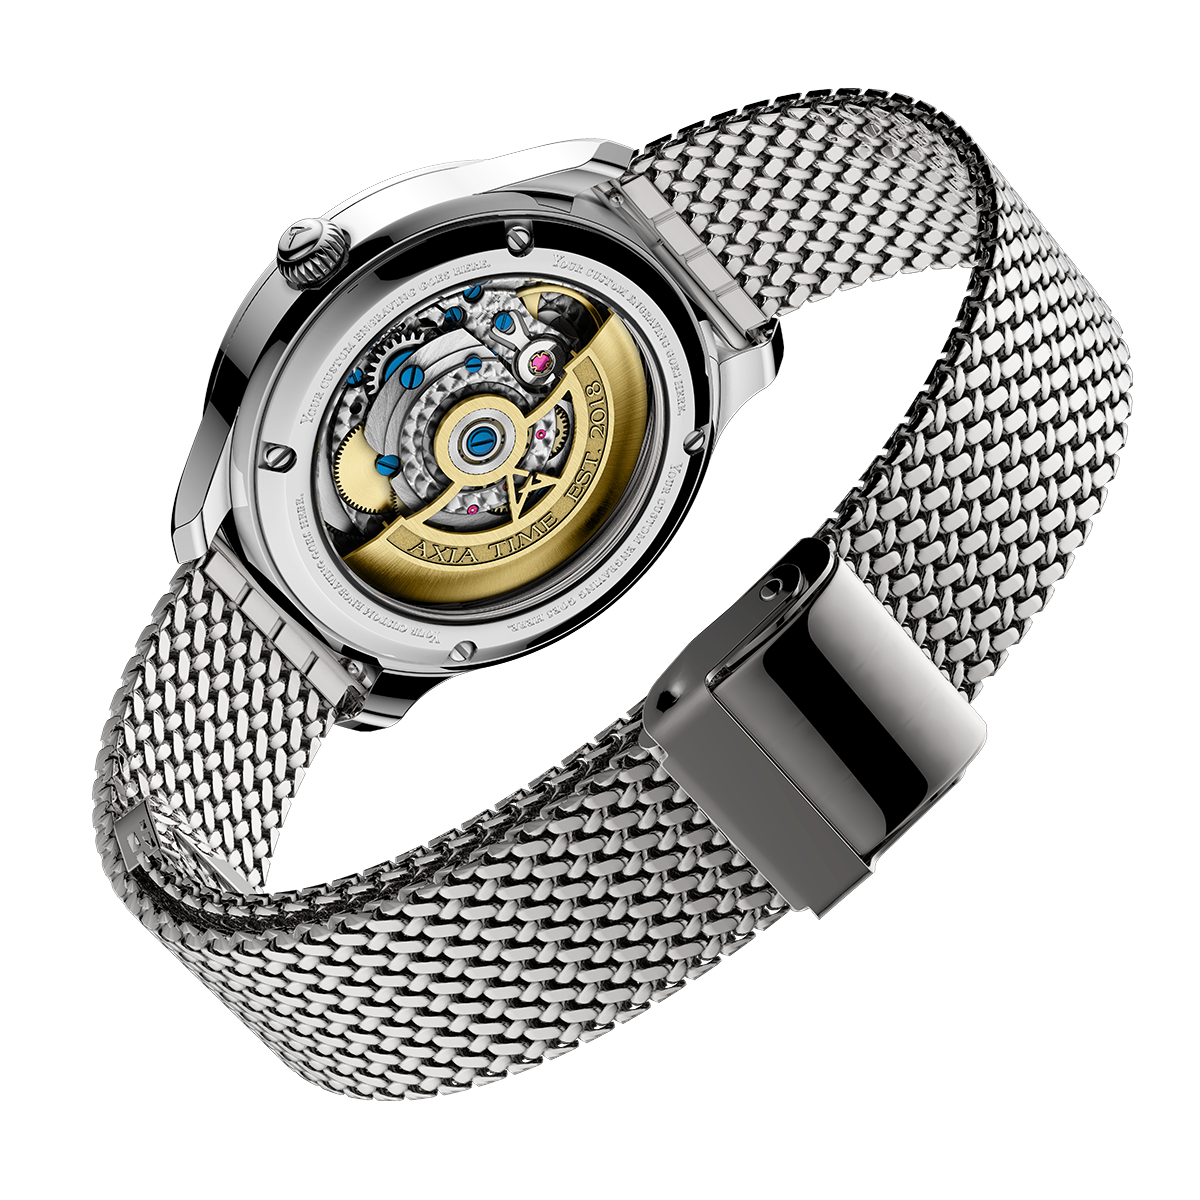 Penn State University Aletheia II. Swiss Made Automatic Watch. Back exhibition case view. Stainless steel mesh bracelet.